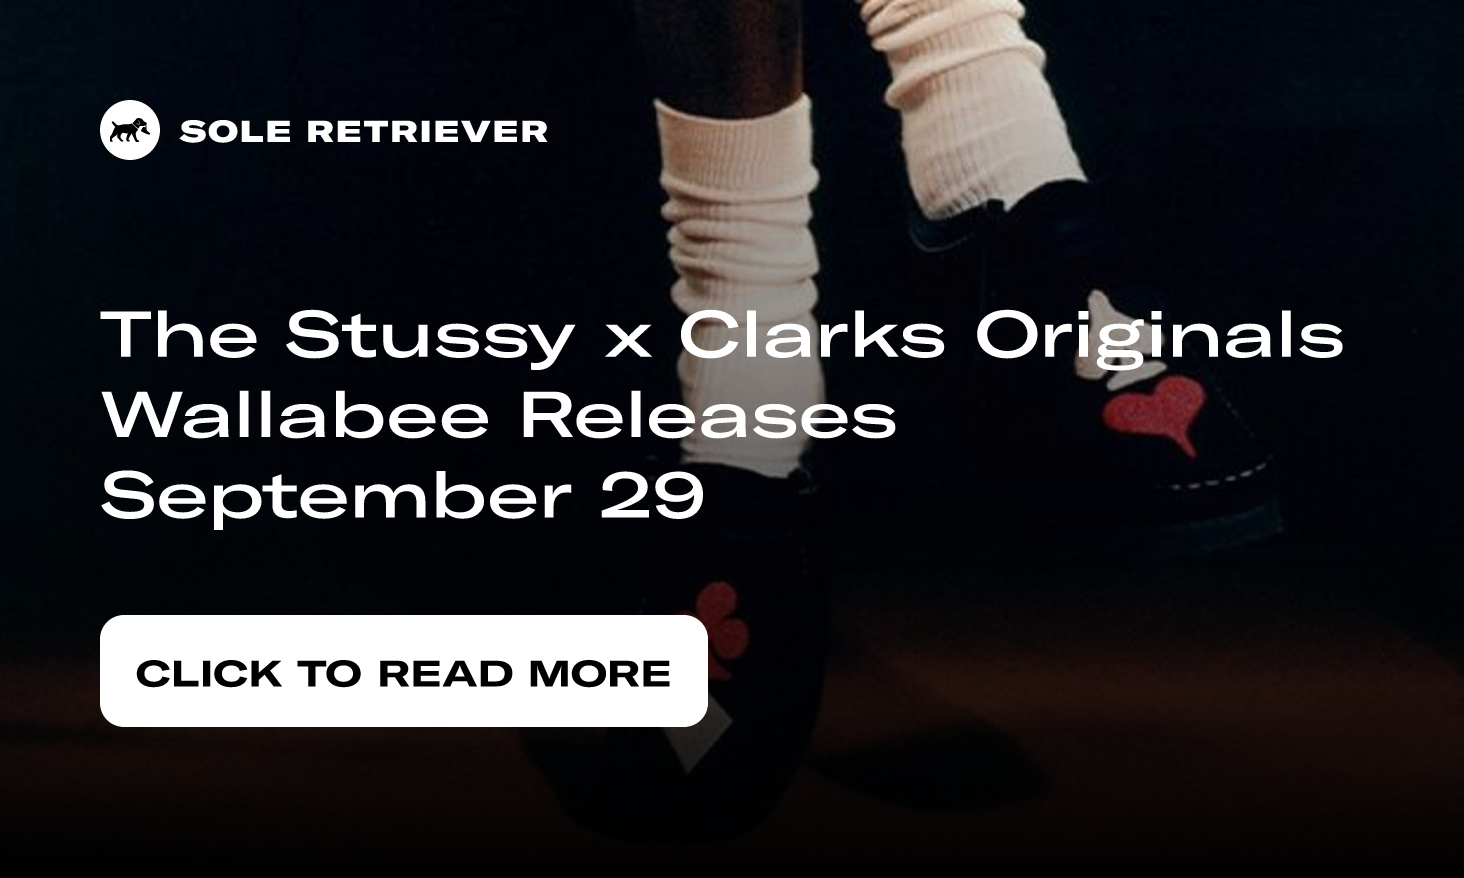 The Stussy x Clarks Originals Wallabee Releases September 29